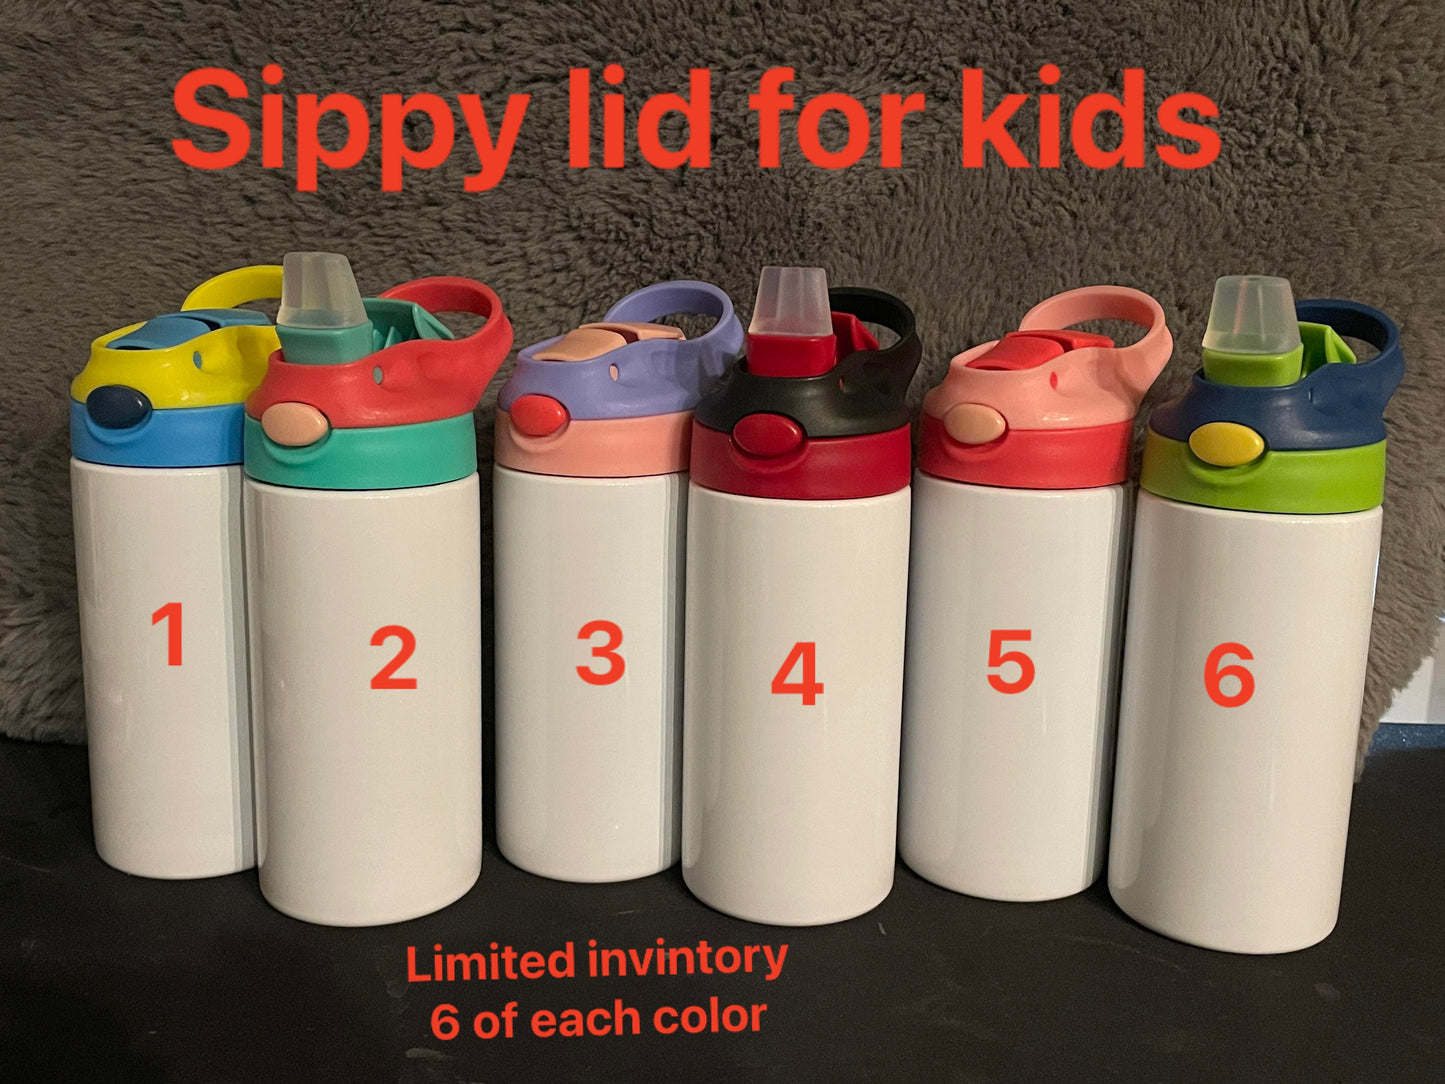 Custom Kids sippy cup - Custom baby bottle, kid, kids, sippy cup with pictures of your family, pets, whatever you want. Tv show, anime, cartoon, quote. Message me what you want, tumbler, custom, blank